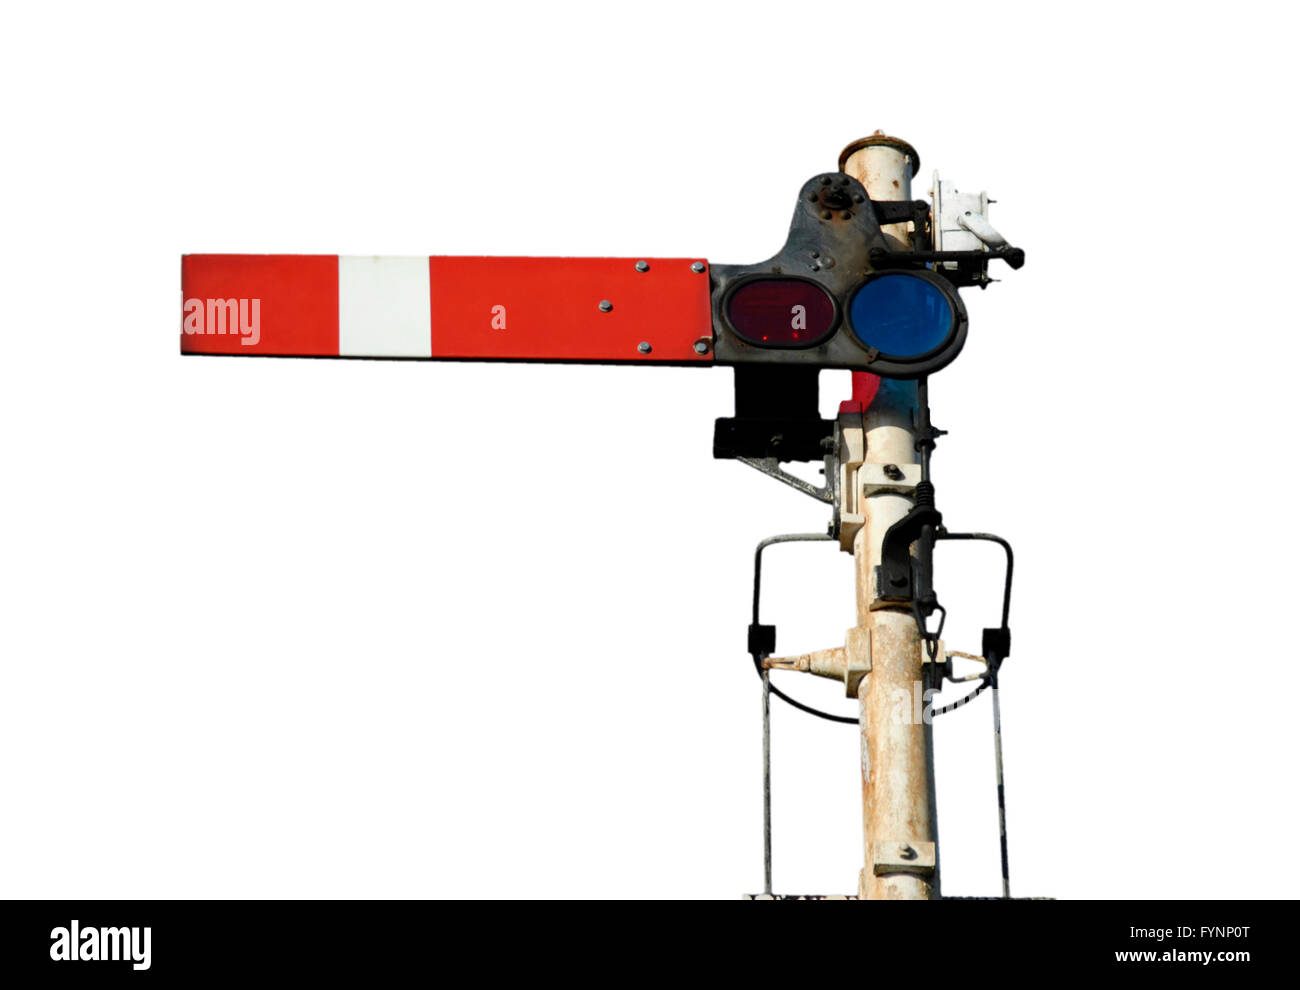 Railway train transport semaphore track signal in the halt or stop position. Stock Photo